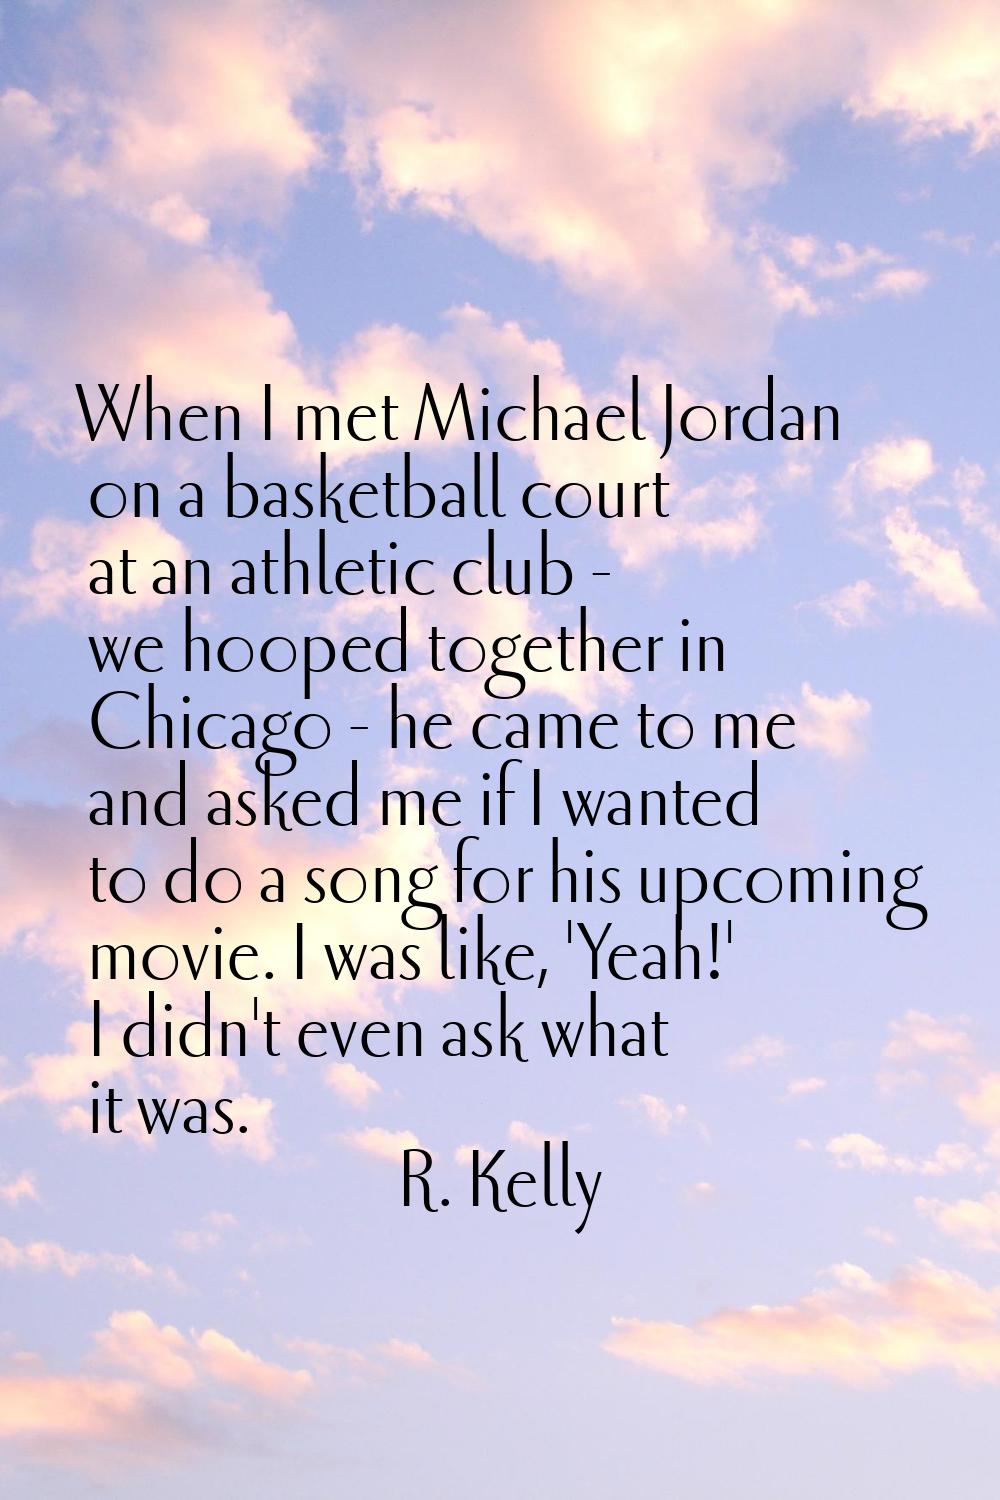 When I met Michael Jordan on a basketball court at an athletic club - we hooped together in Chicago